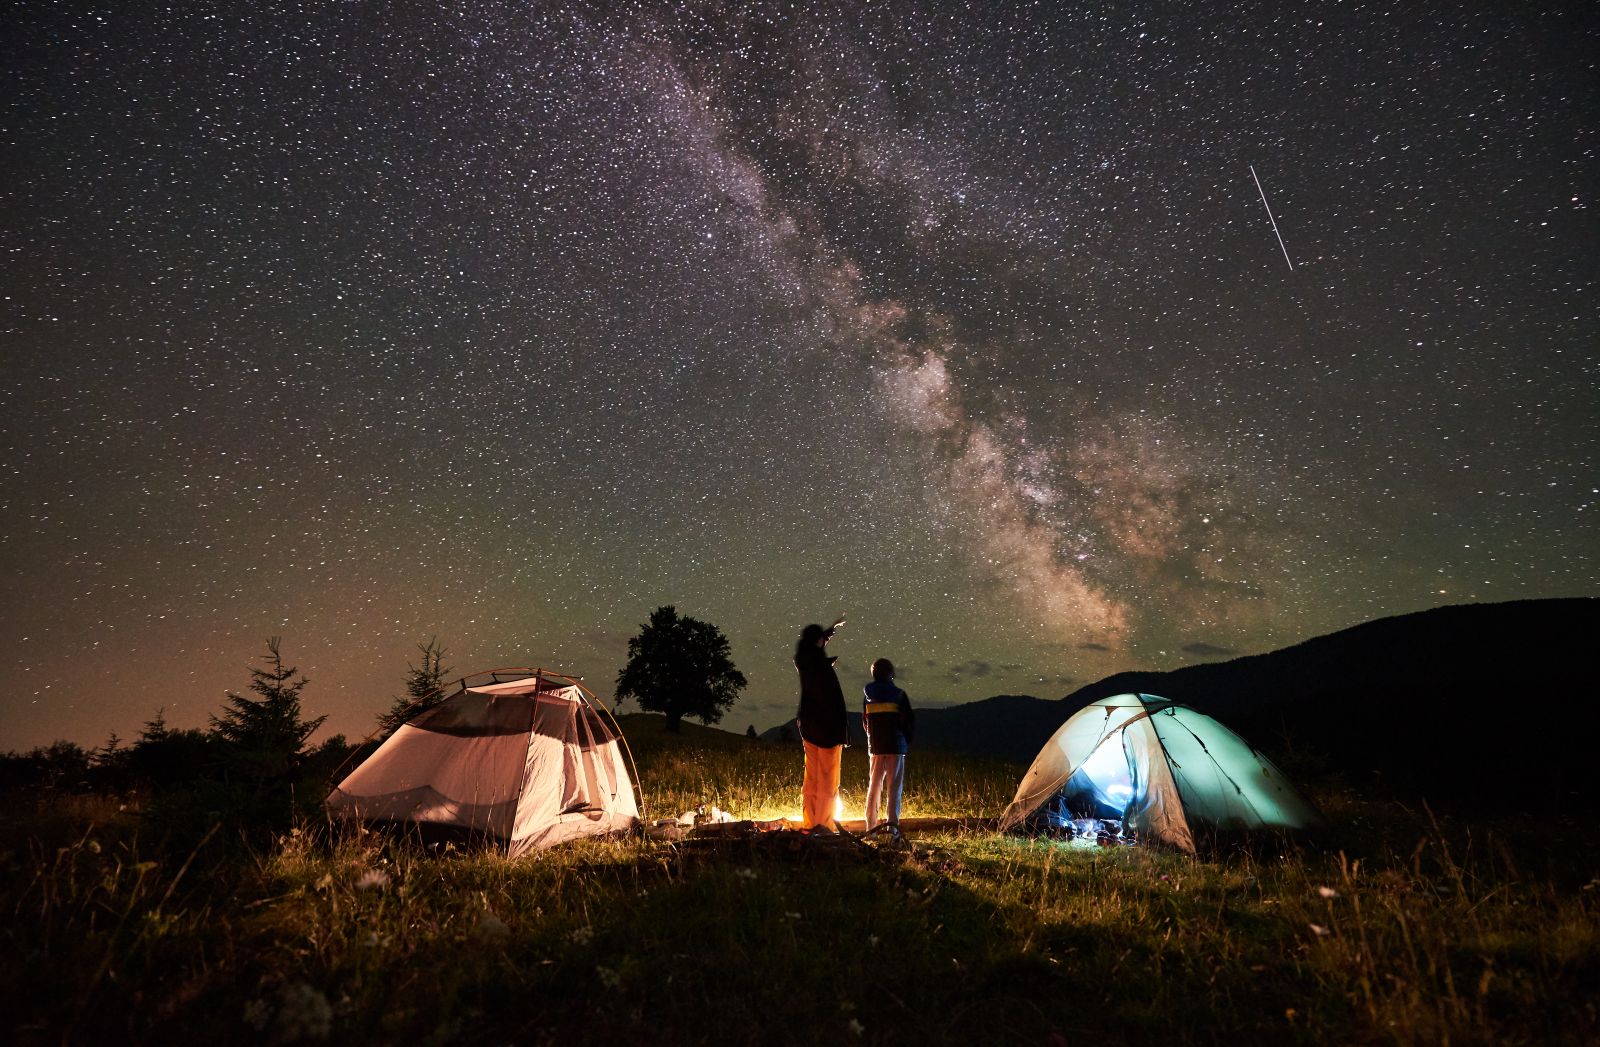 campers stargazing near their tents and fire